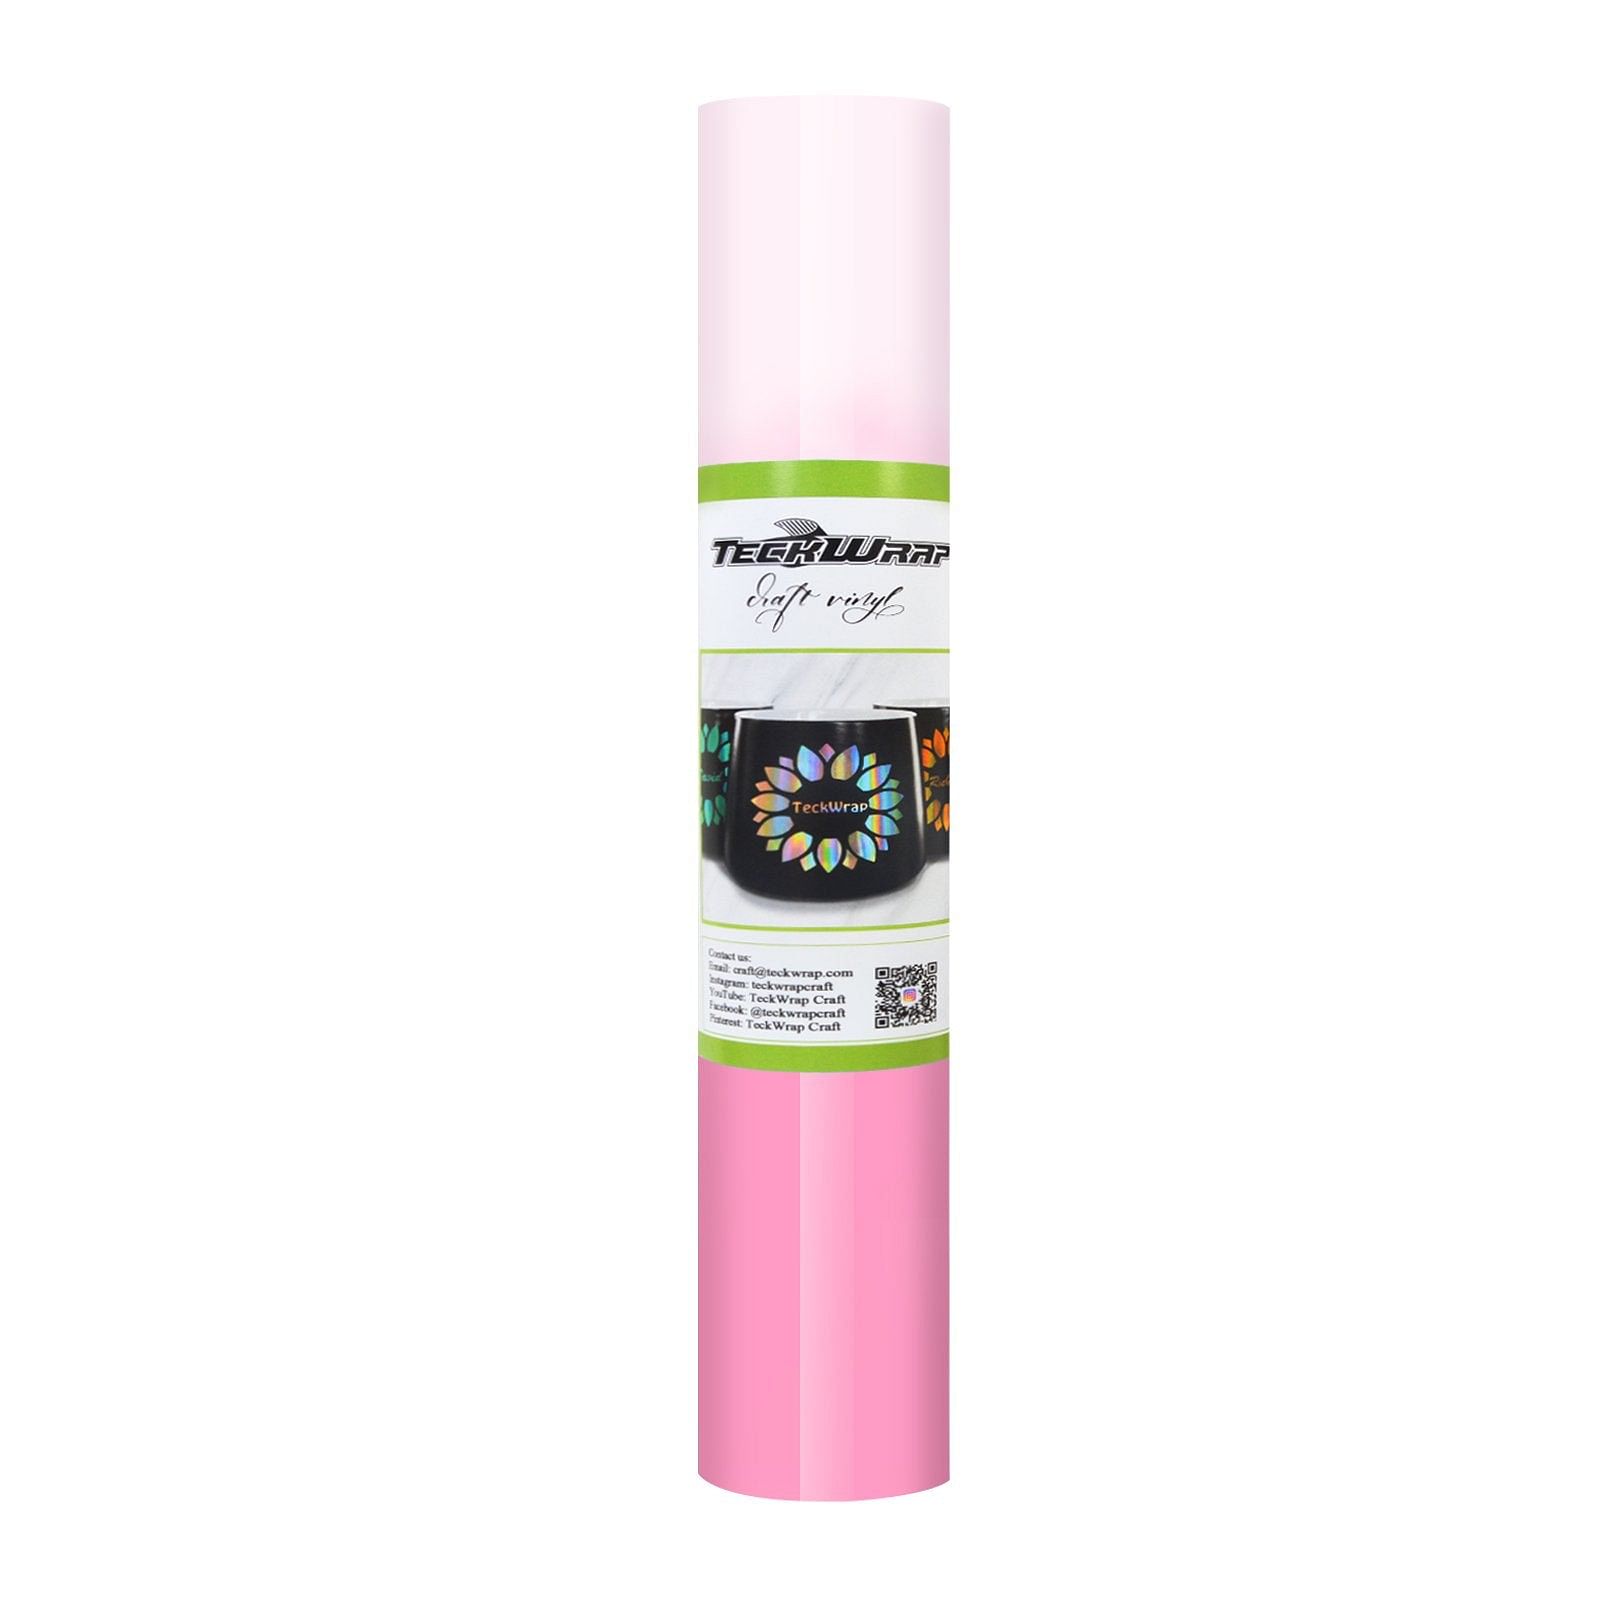 WRAPXPERT Cold Color Changing Vinyl Permanent Adhesive Roll White to  Pink,12x5ft Cold Sensitive Permanent Vinyls,Chanemelon Color Change  Sticker